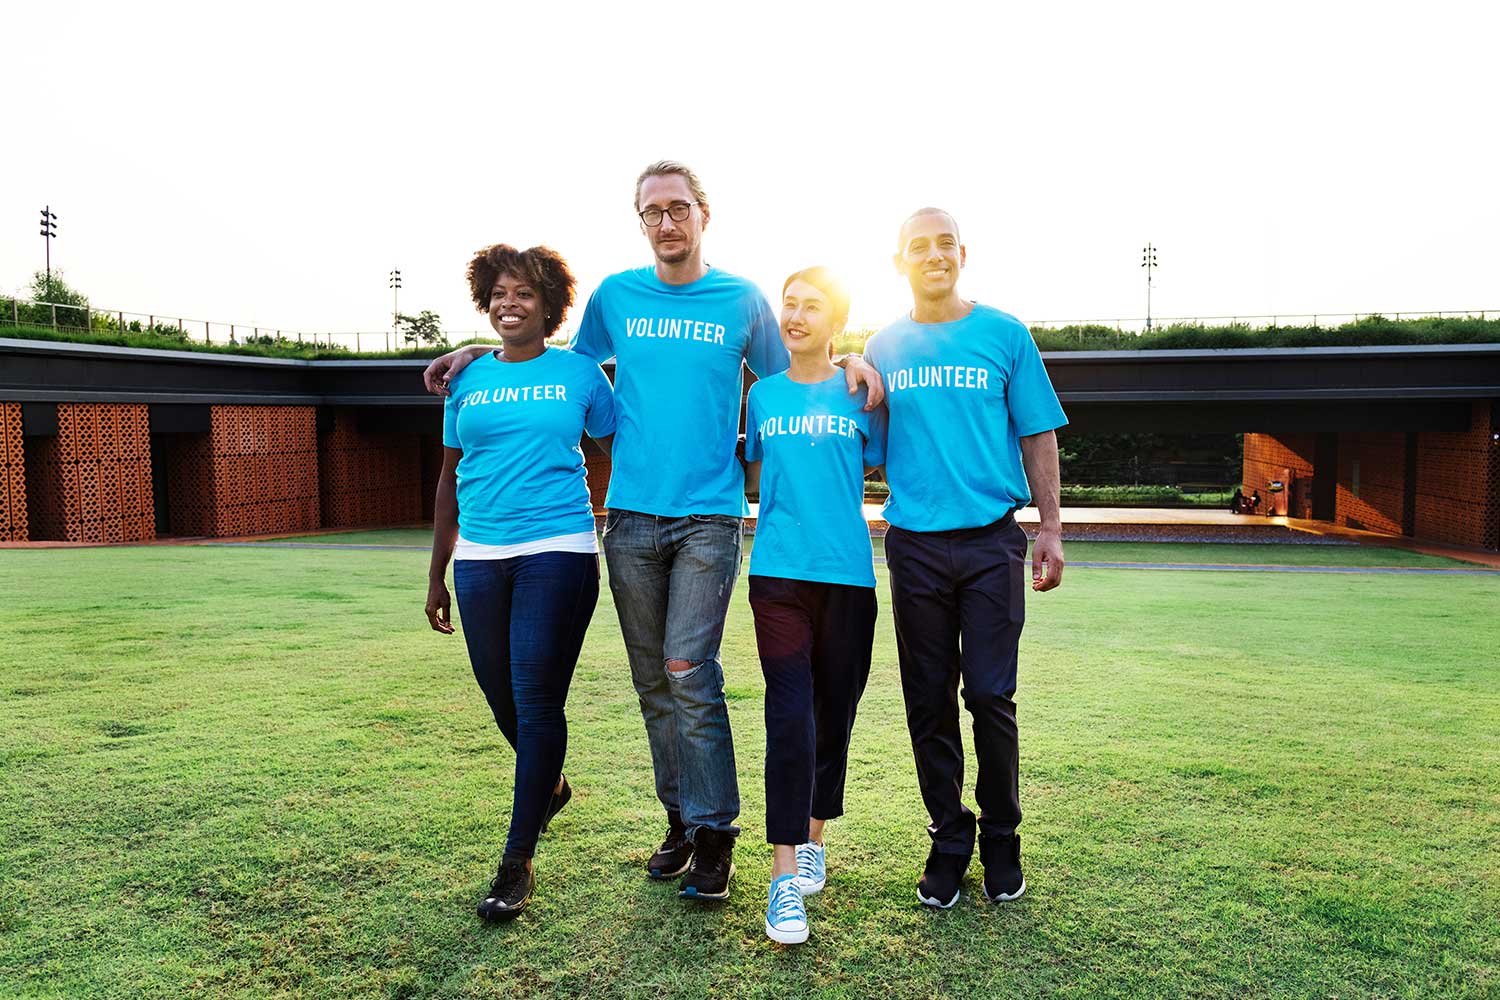 Four people in blue shirts stand on a field.